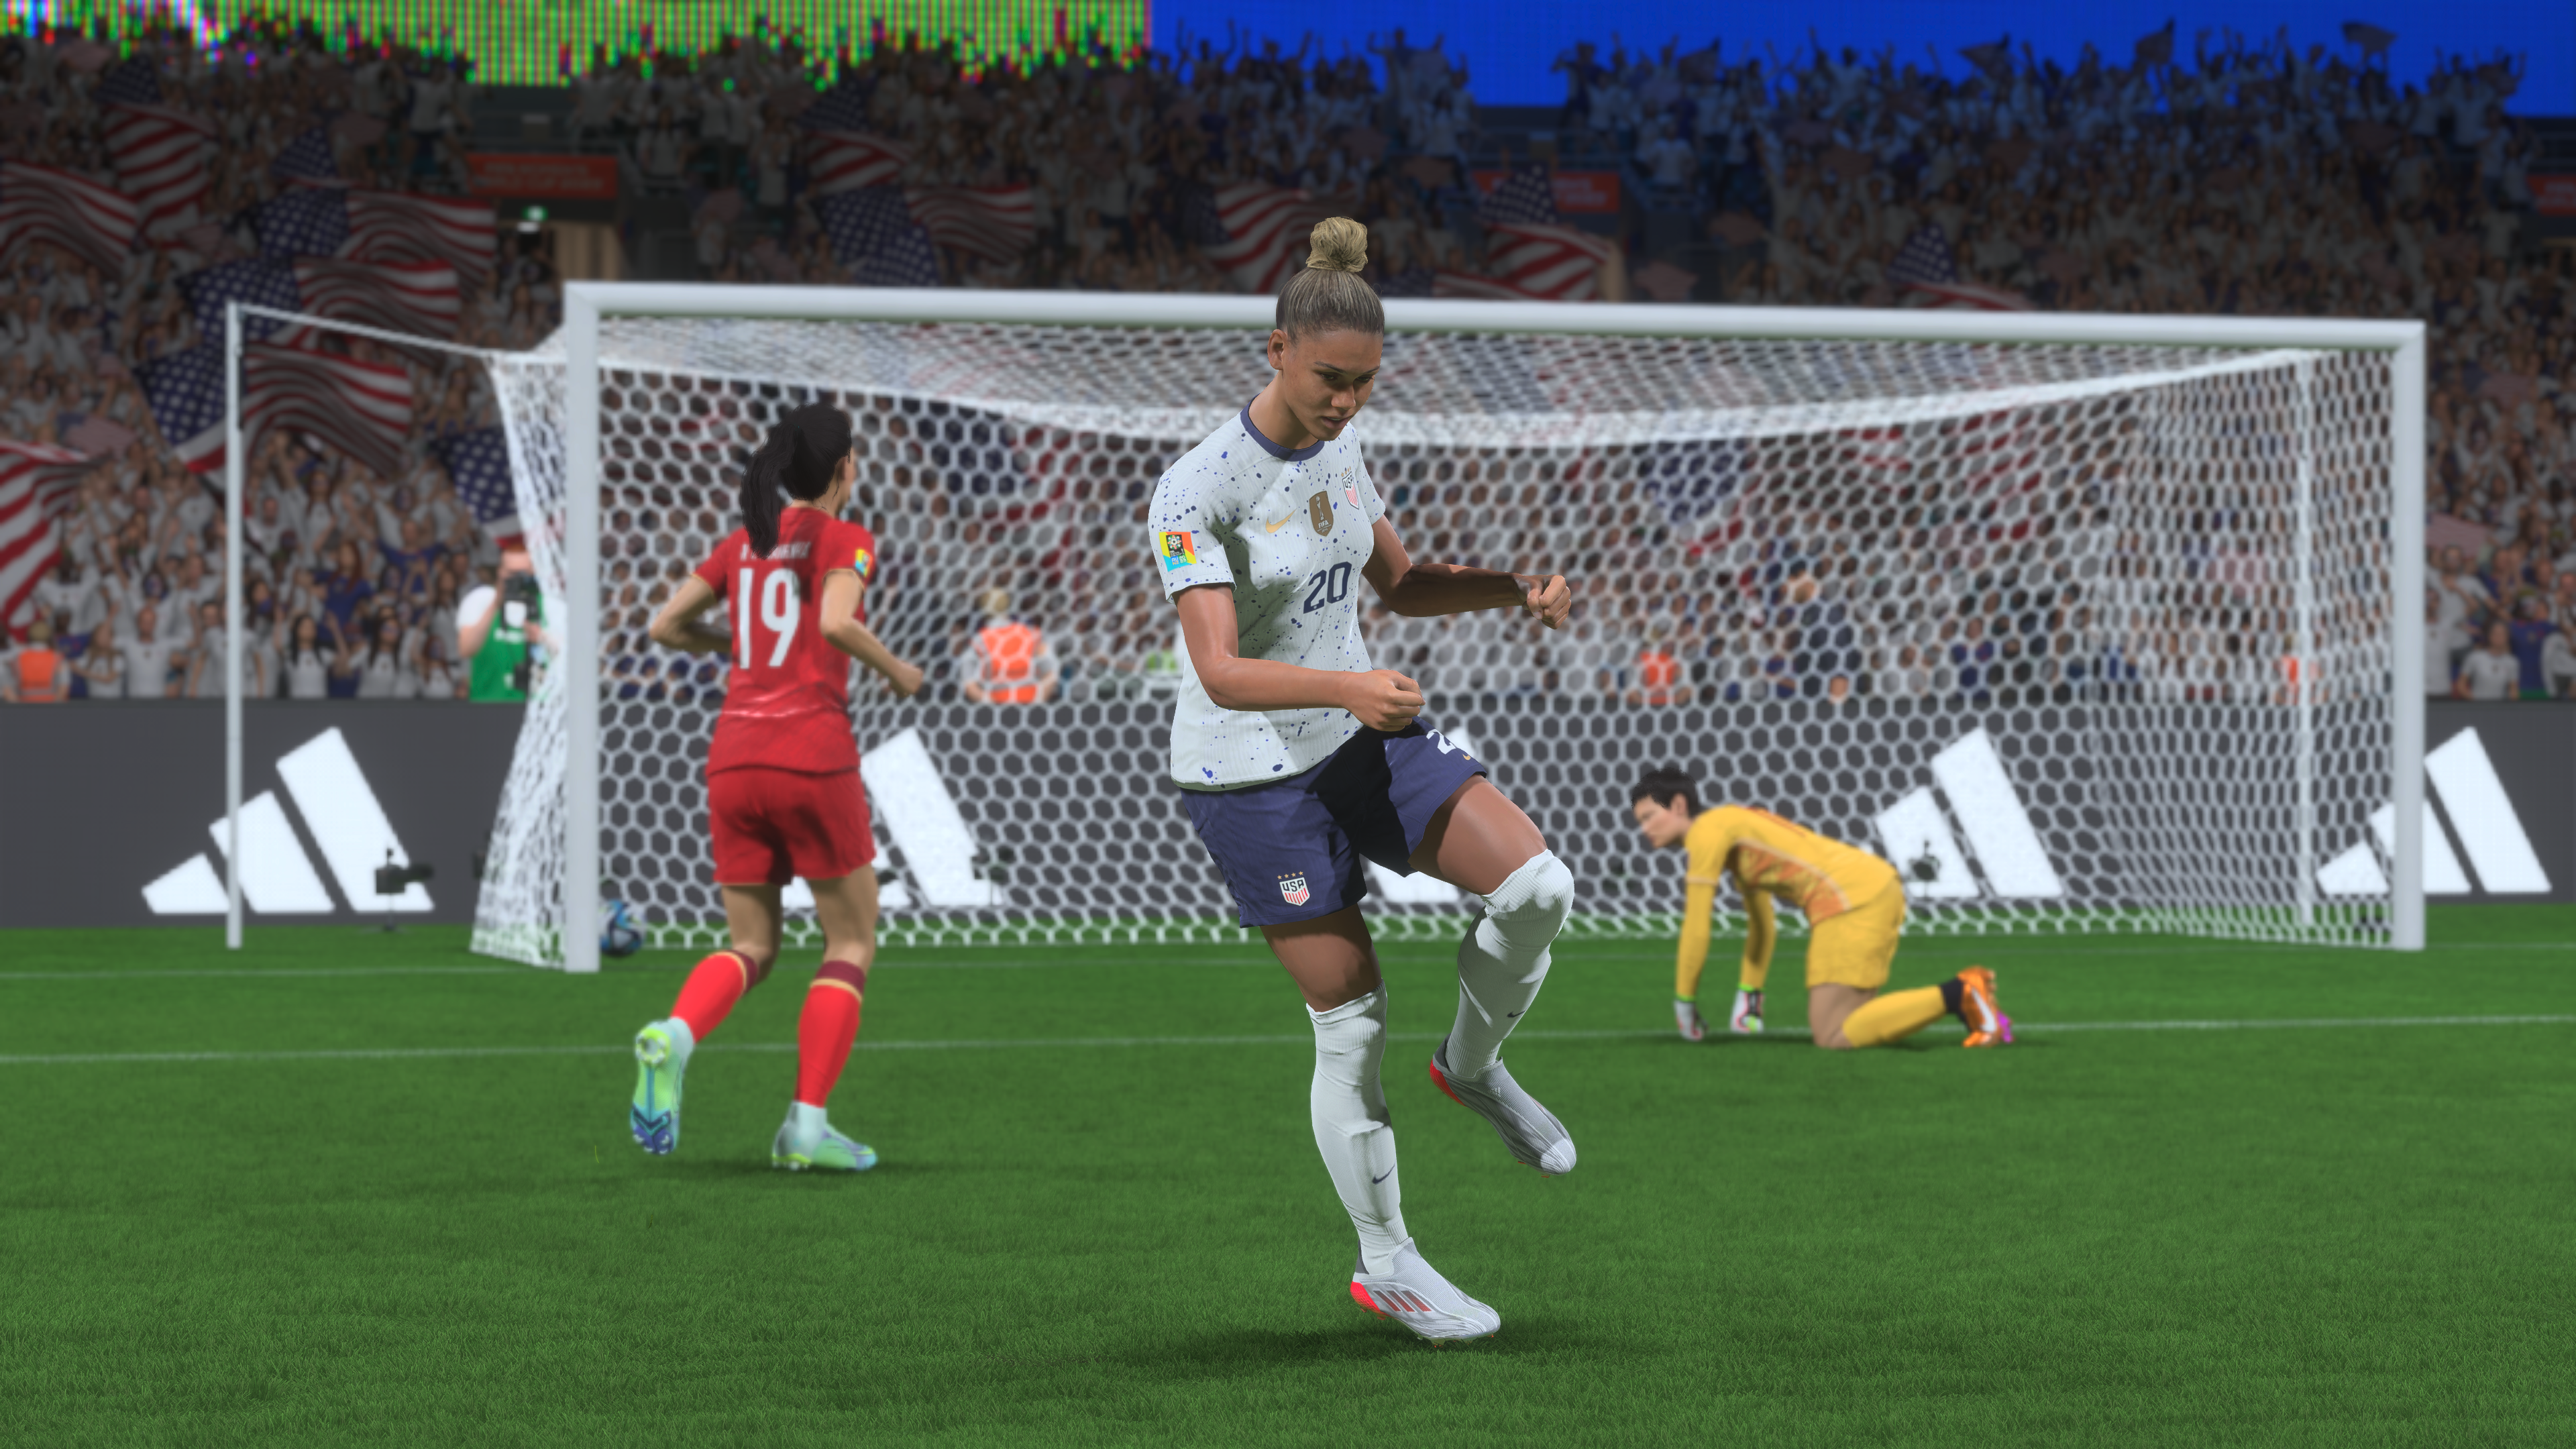 FIFA 23 Patch #16 Available Today on All Platforms - Patch Notes